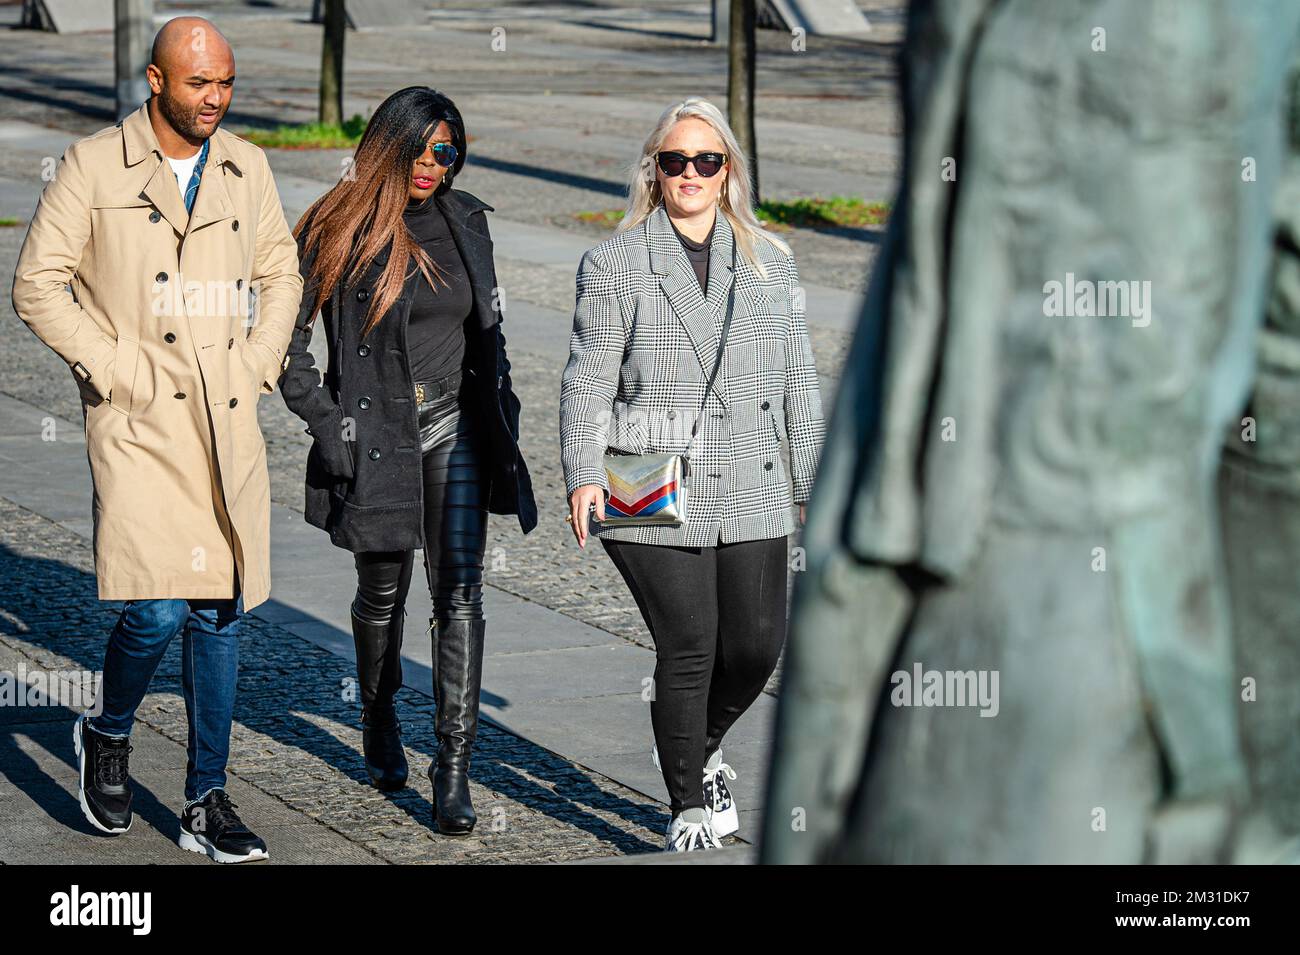 actress Imanuelle Grives (C) arrives for the verdict session of the Antwerp Correctional Court against Dutch actress Imanuelle Grives, accused of dealing drugs, Friday 08 November 2019. The 34-year-old was arrested at the Tomorrowland dance festival with an amount of illegal drugs considered to be for dealing. BELGA PHOTO JONAS ROOSENS Stock Photo